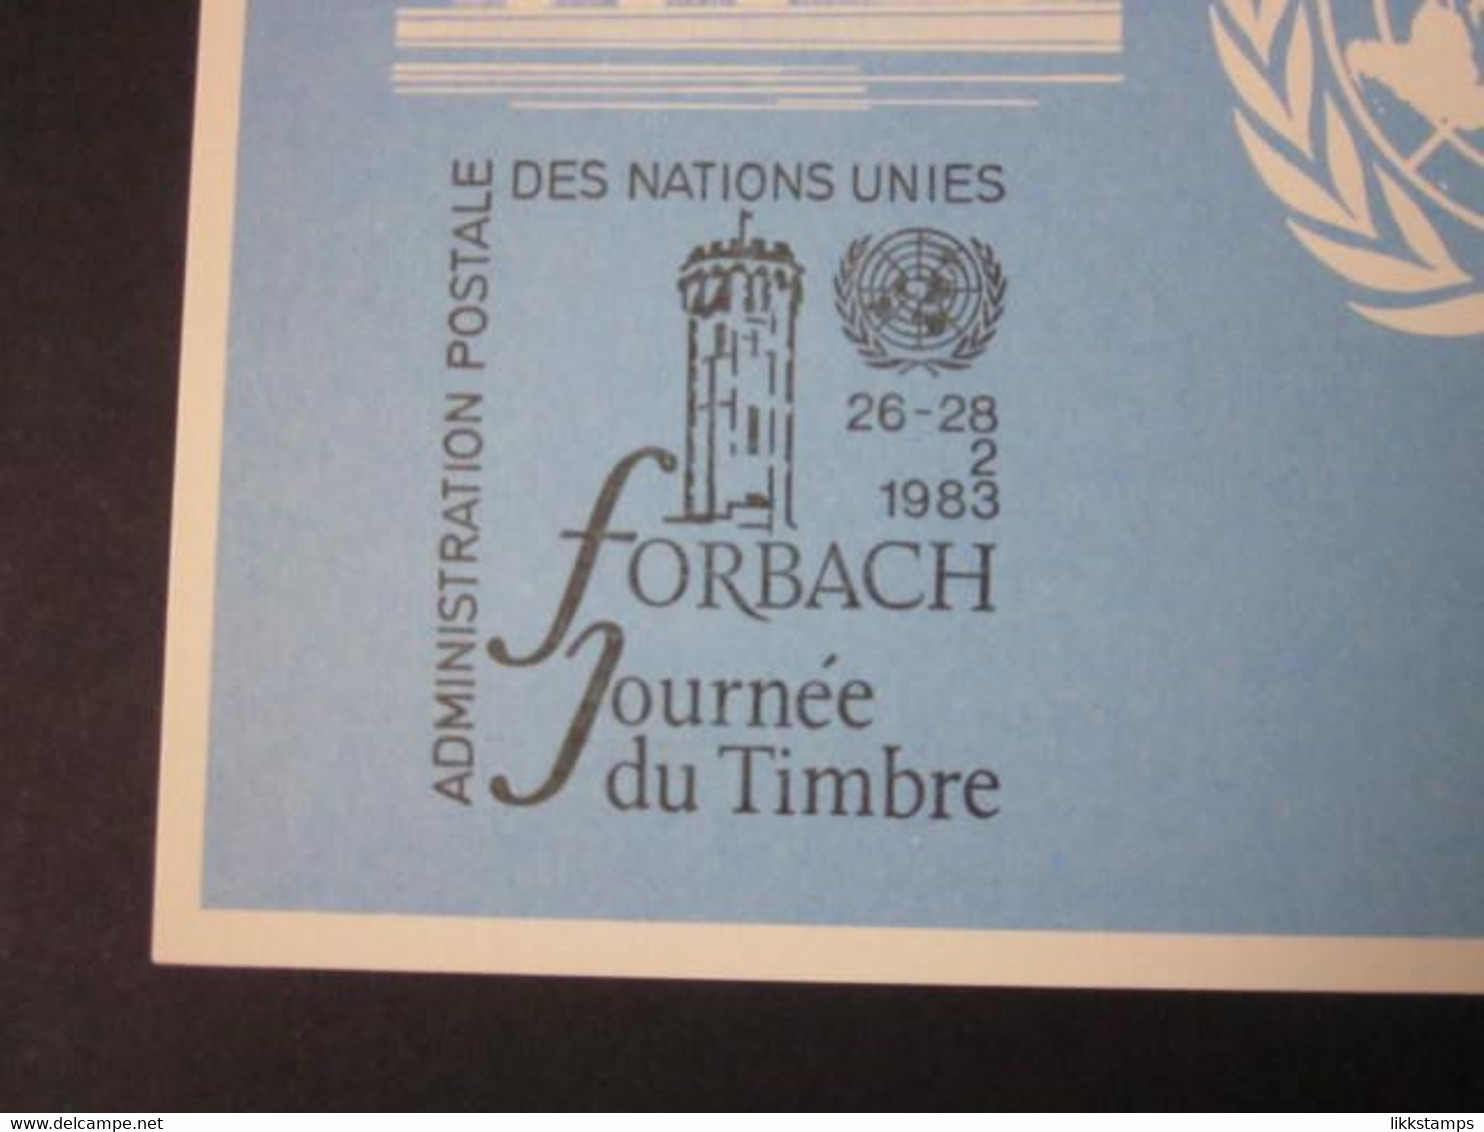 A RARE FORBACH STAMP DAY 1983 EXHIBITION SOUVENIR CARD WITH FIRST DAY OF EVENT CANCELLATION. ( 02277 ) - Briefe U. Dokumente